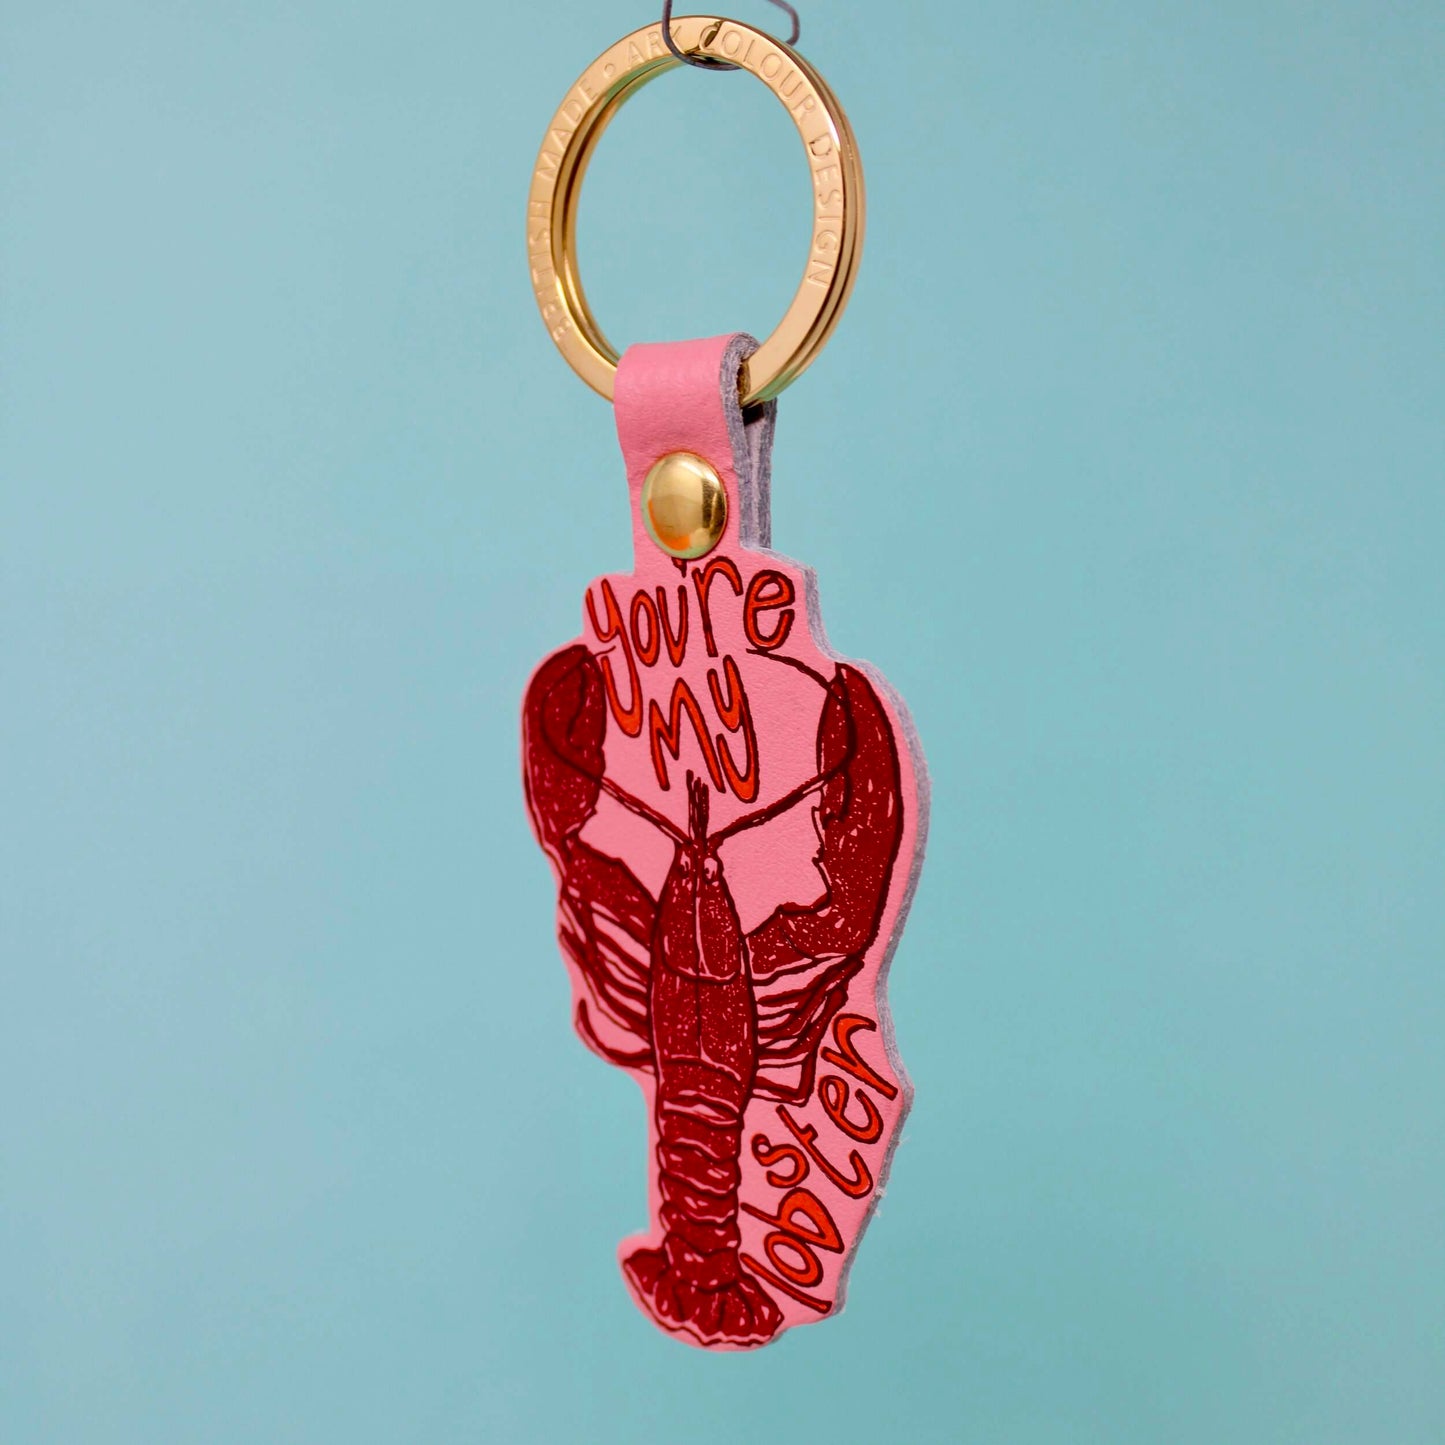 You're My Lobster Keyring